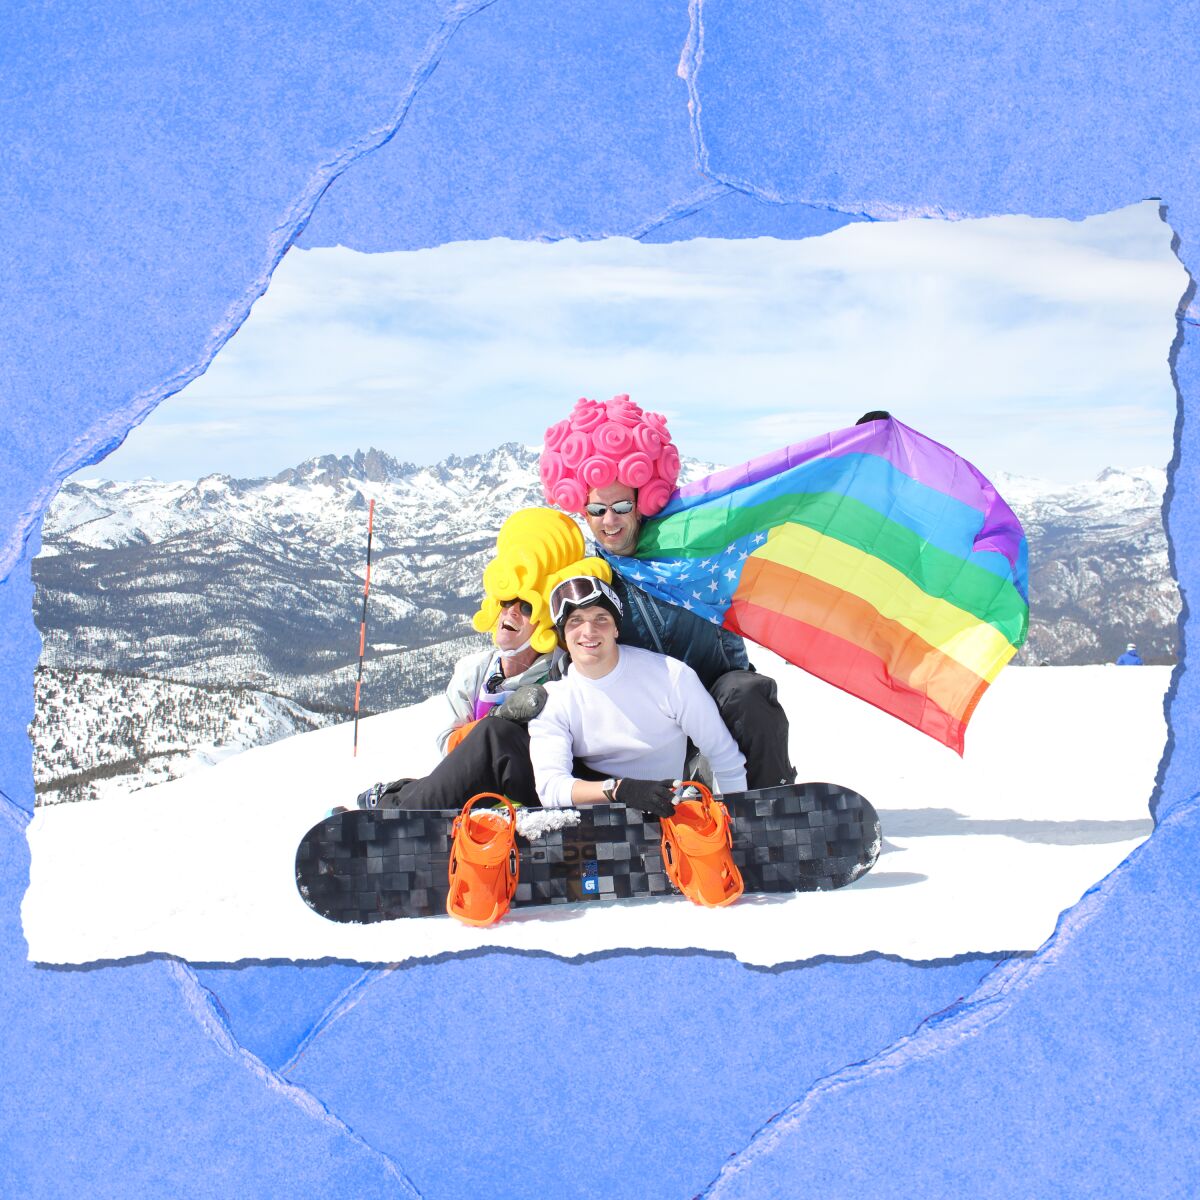 People in brightly colored wigs pose atop a snowy mountain. One holds out a rainbow flag.